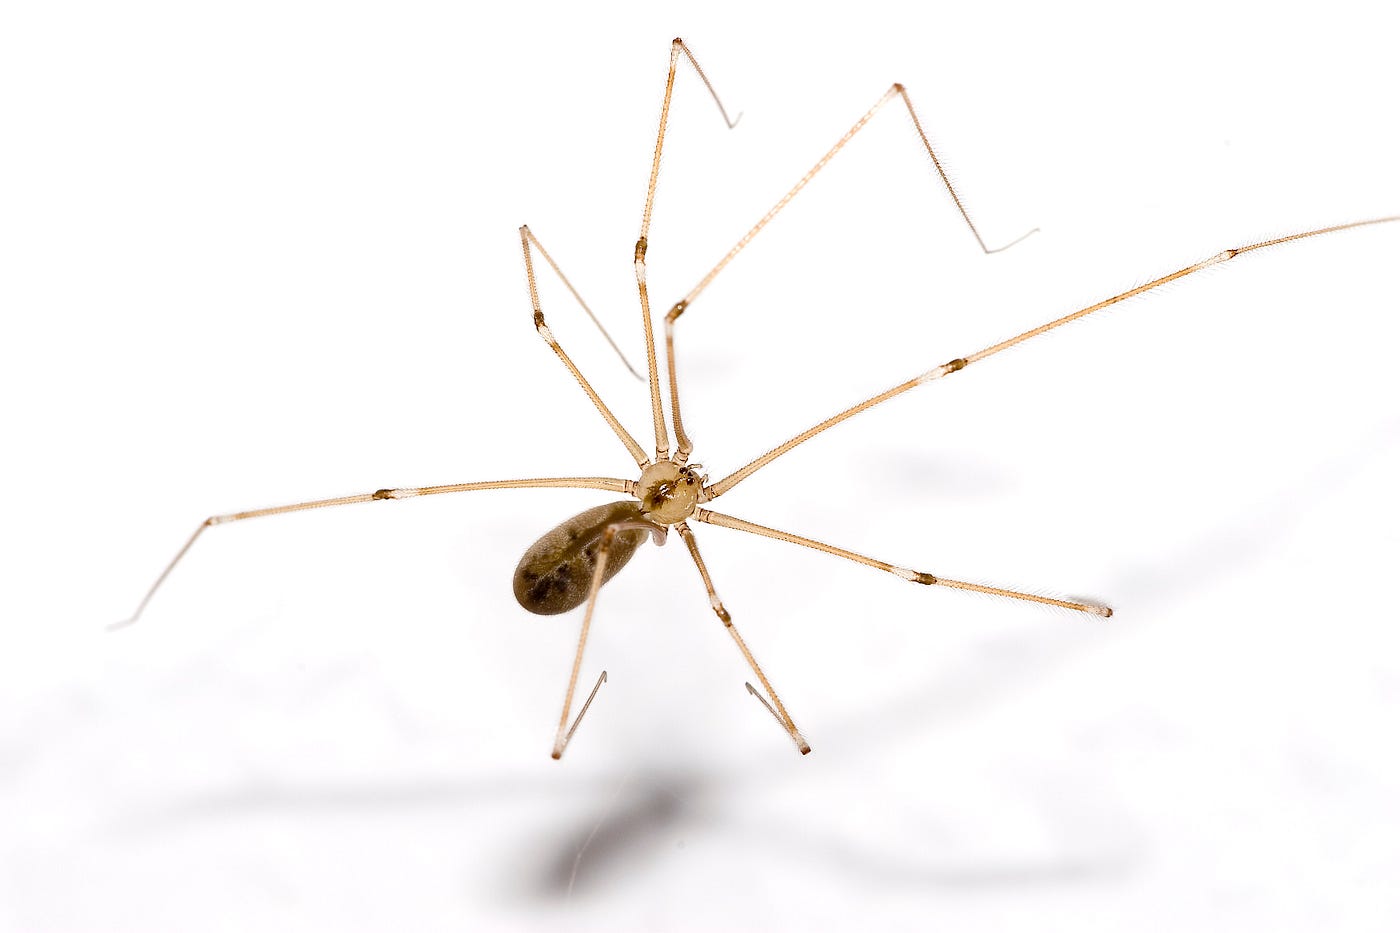 Daddy Longlegs Risk Lifeand Especially Limbto Survive